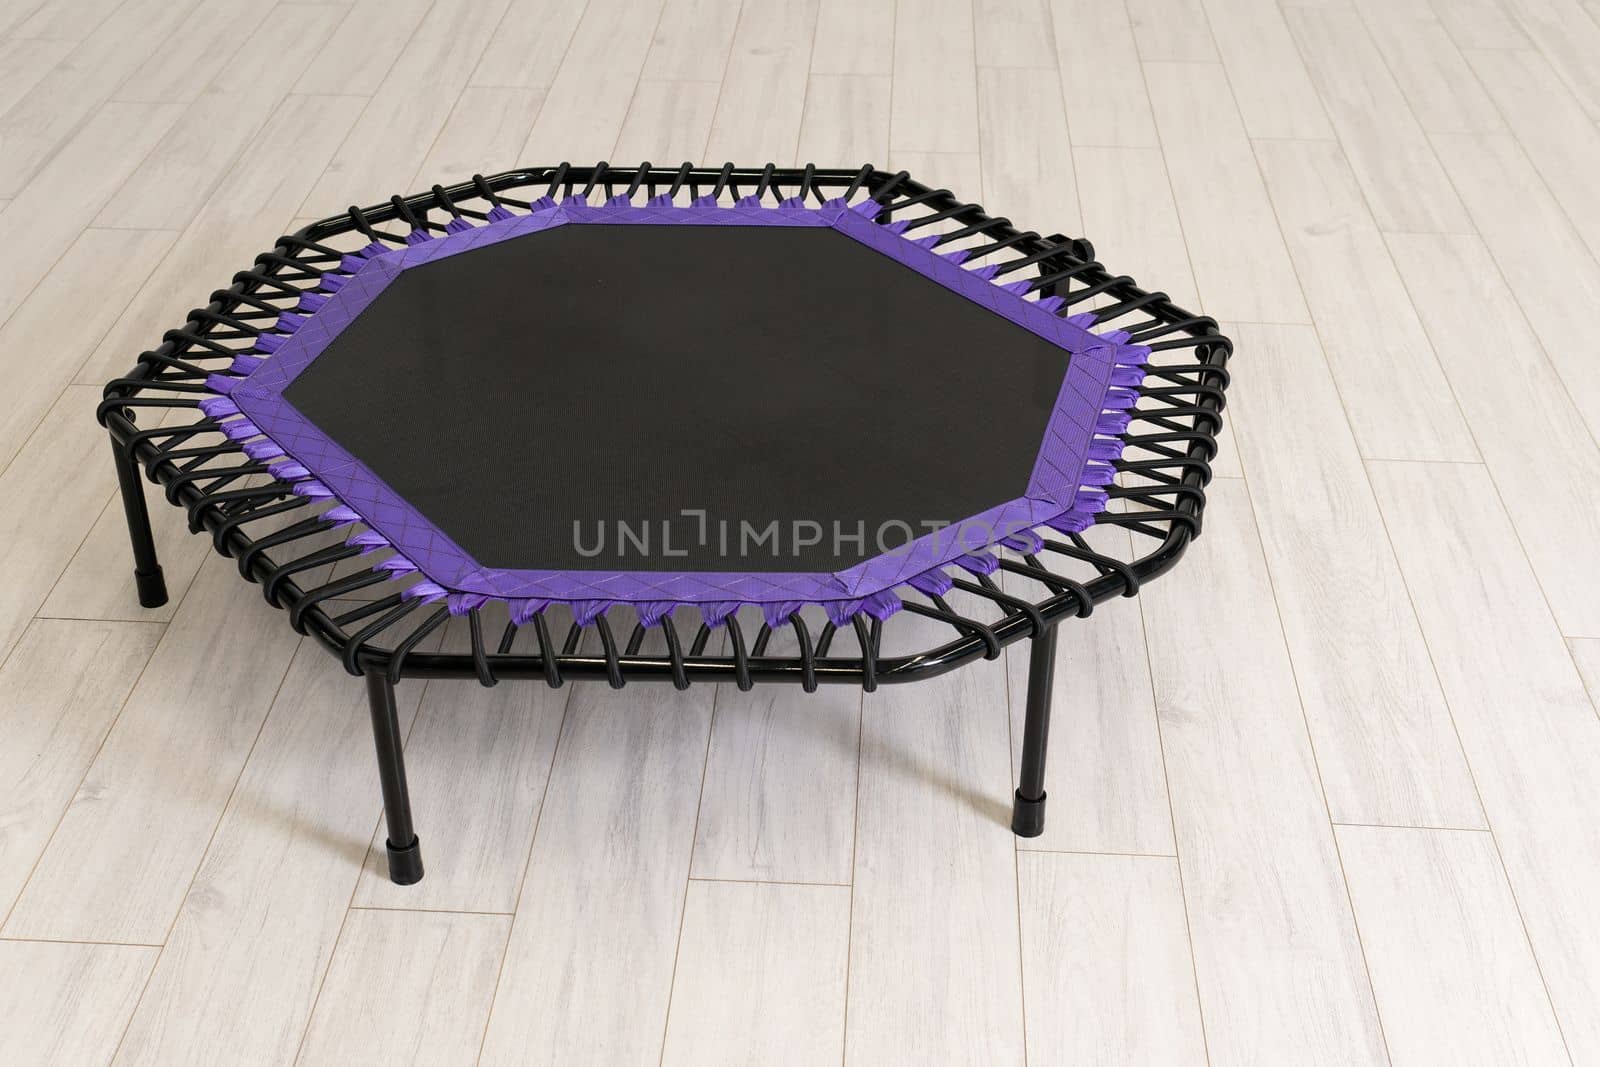 cyan jump white purple growth little trampoline leisure fitness empty space small game by 89167702191